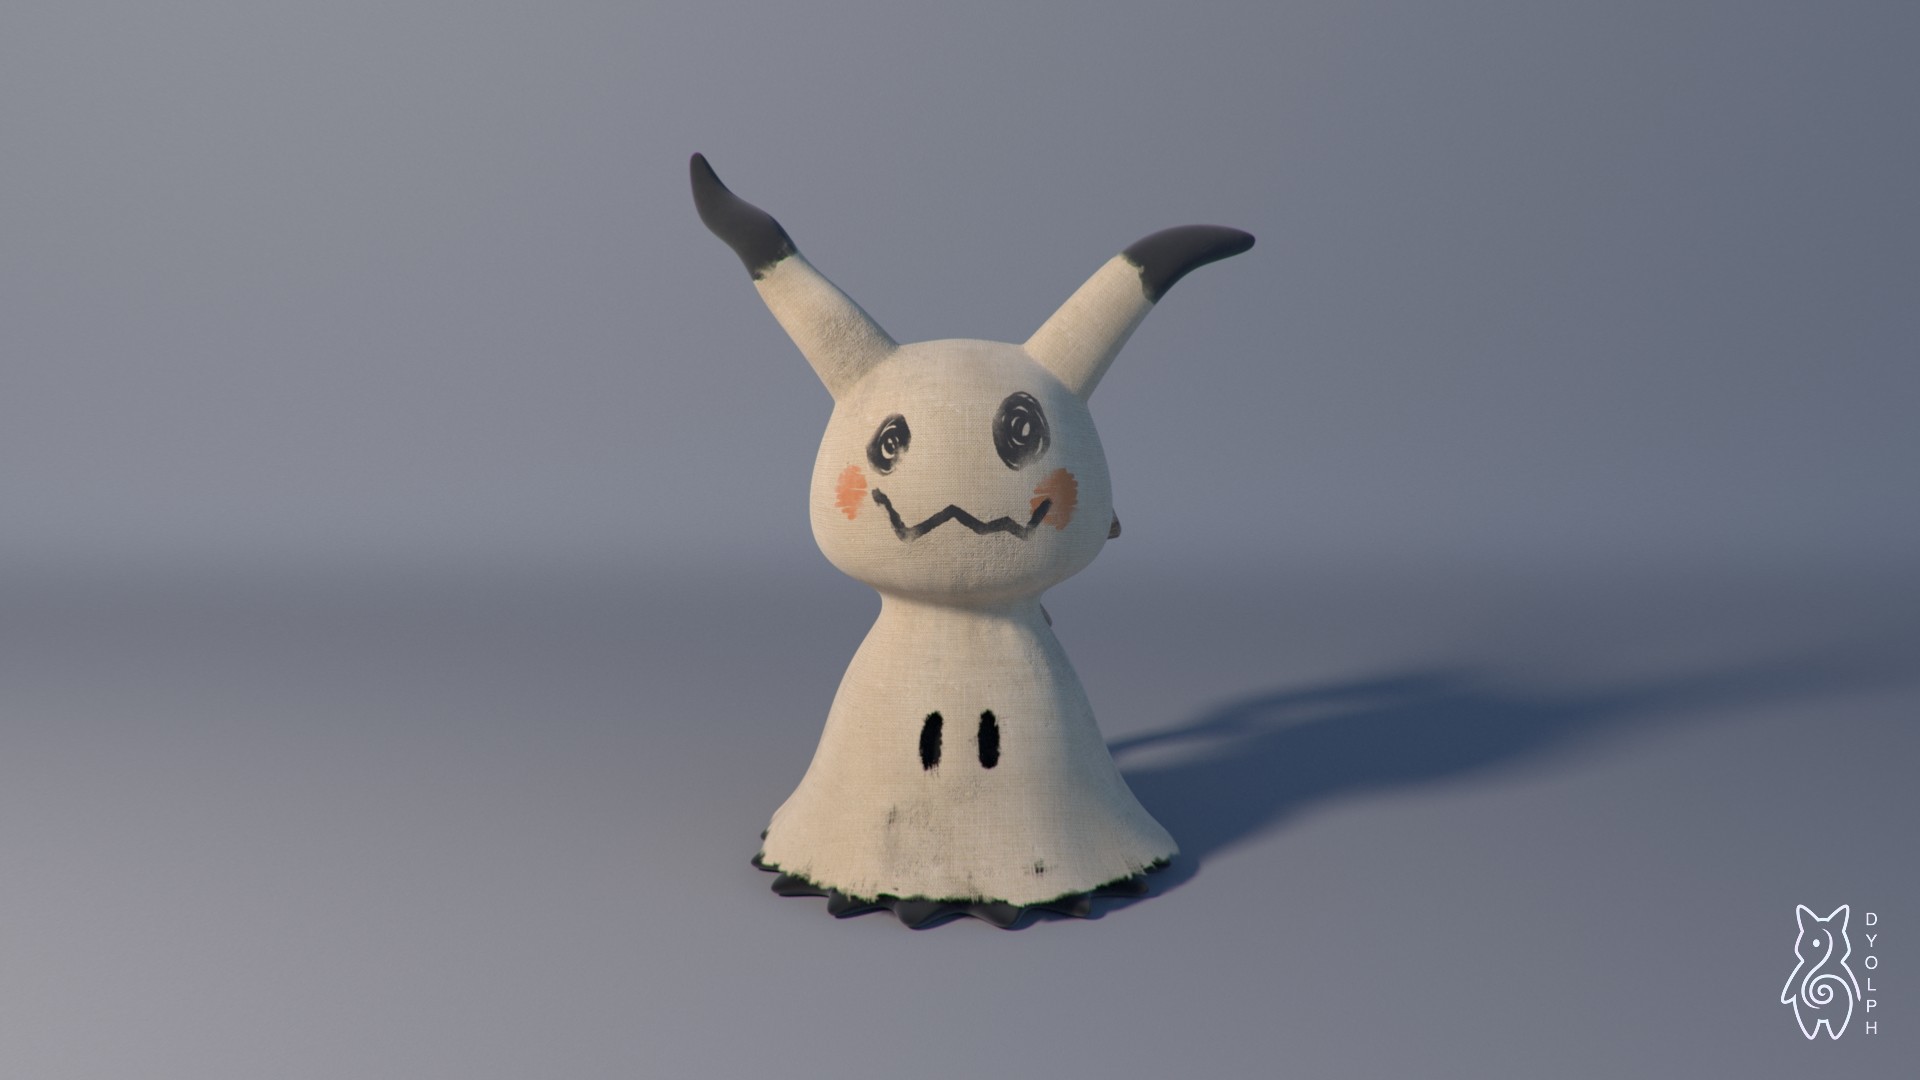 1920x1080 Dylan caille mimikyu final